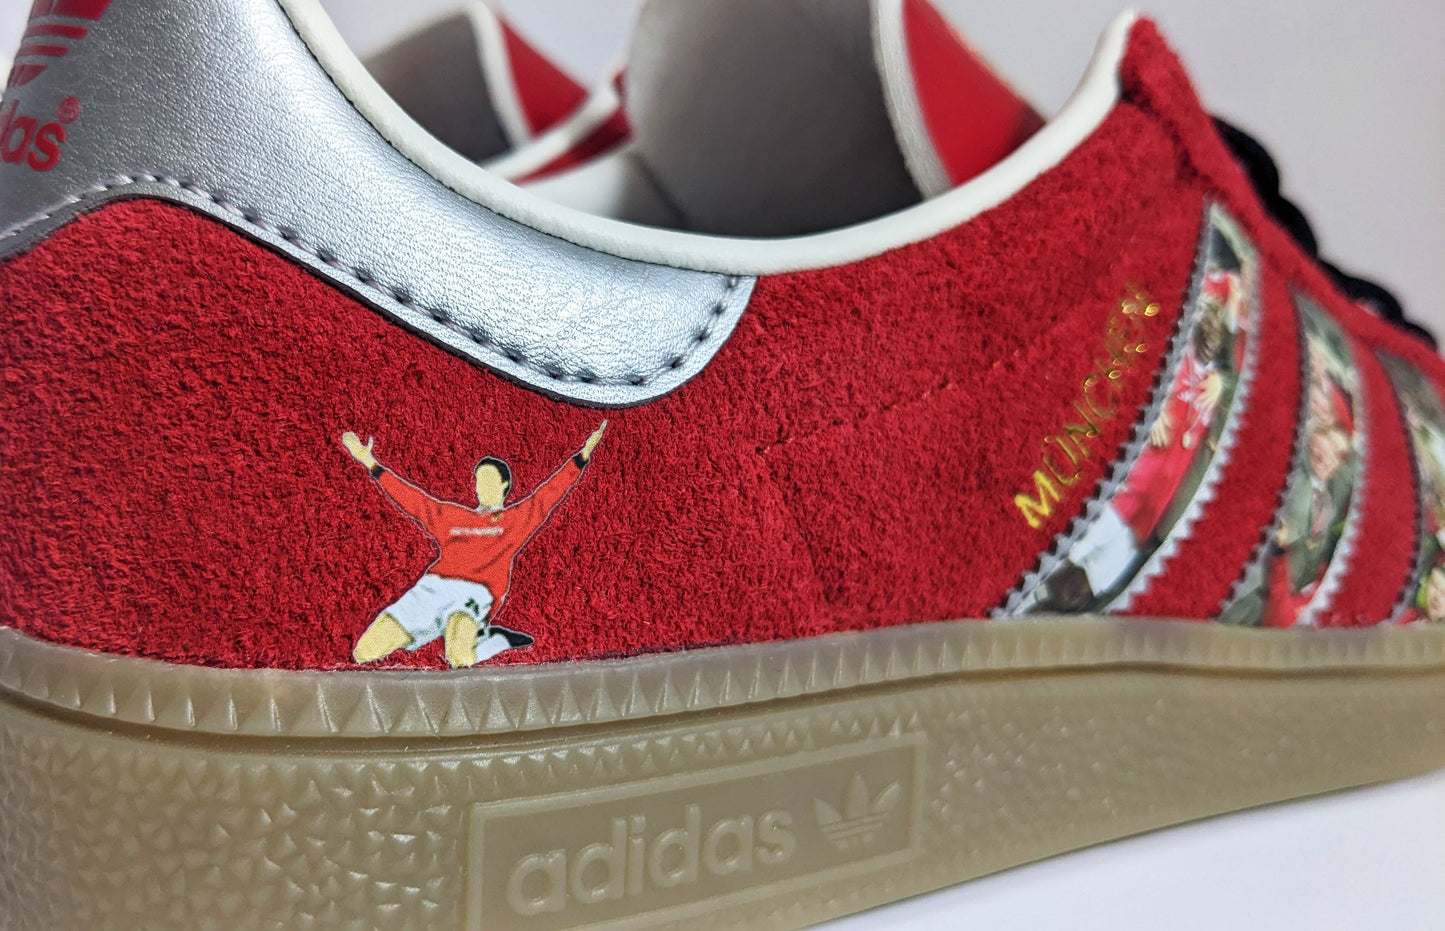 Limited edition Manchester United Treble winners inspired Red / Silver Adidas custom Munchen trainers  / sneakers